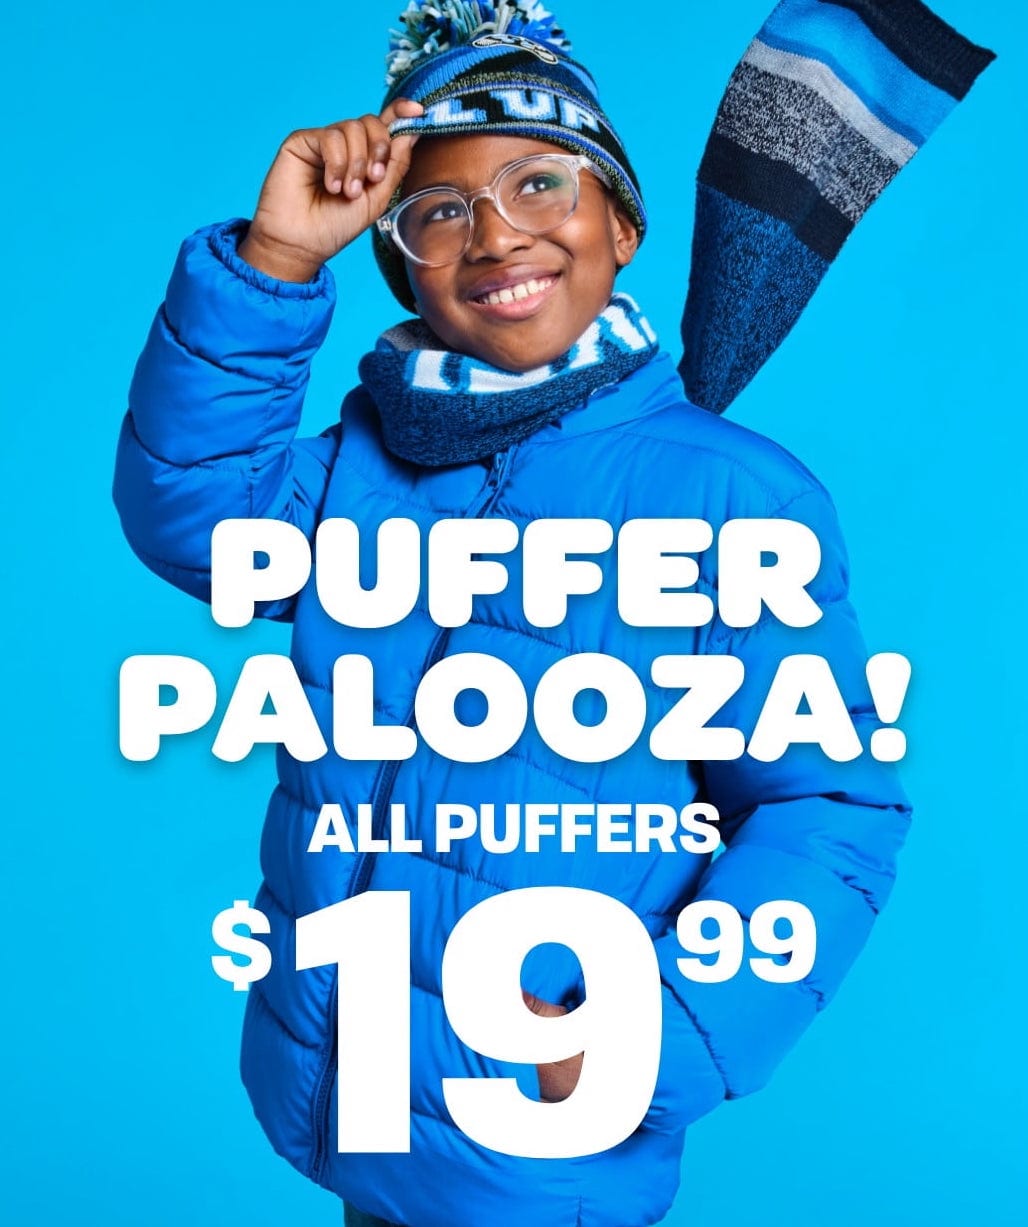 Puffer Palooza! Our Top rated jacket, back by popular demand! Now Only $19.99